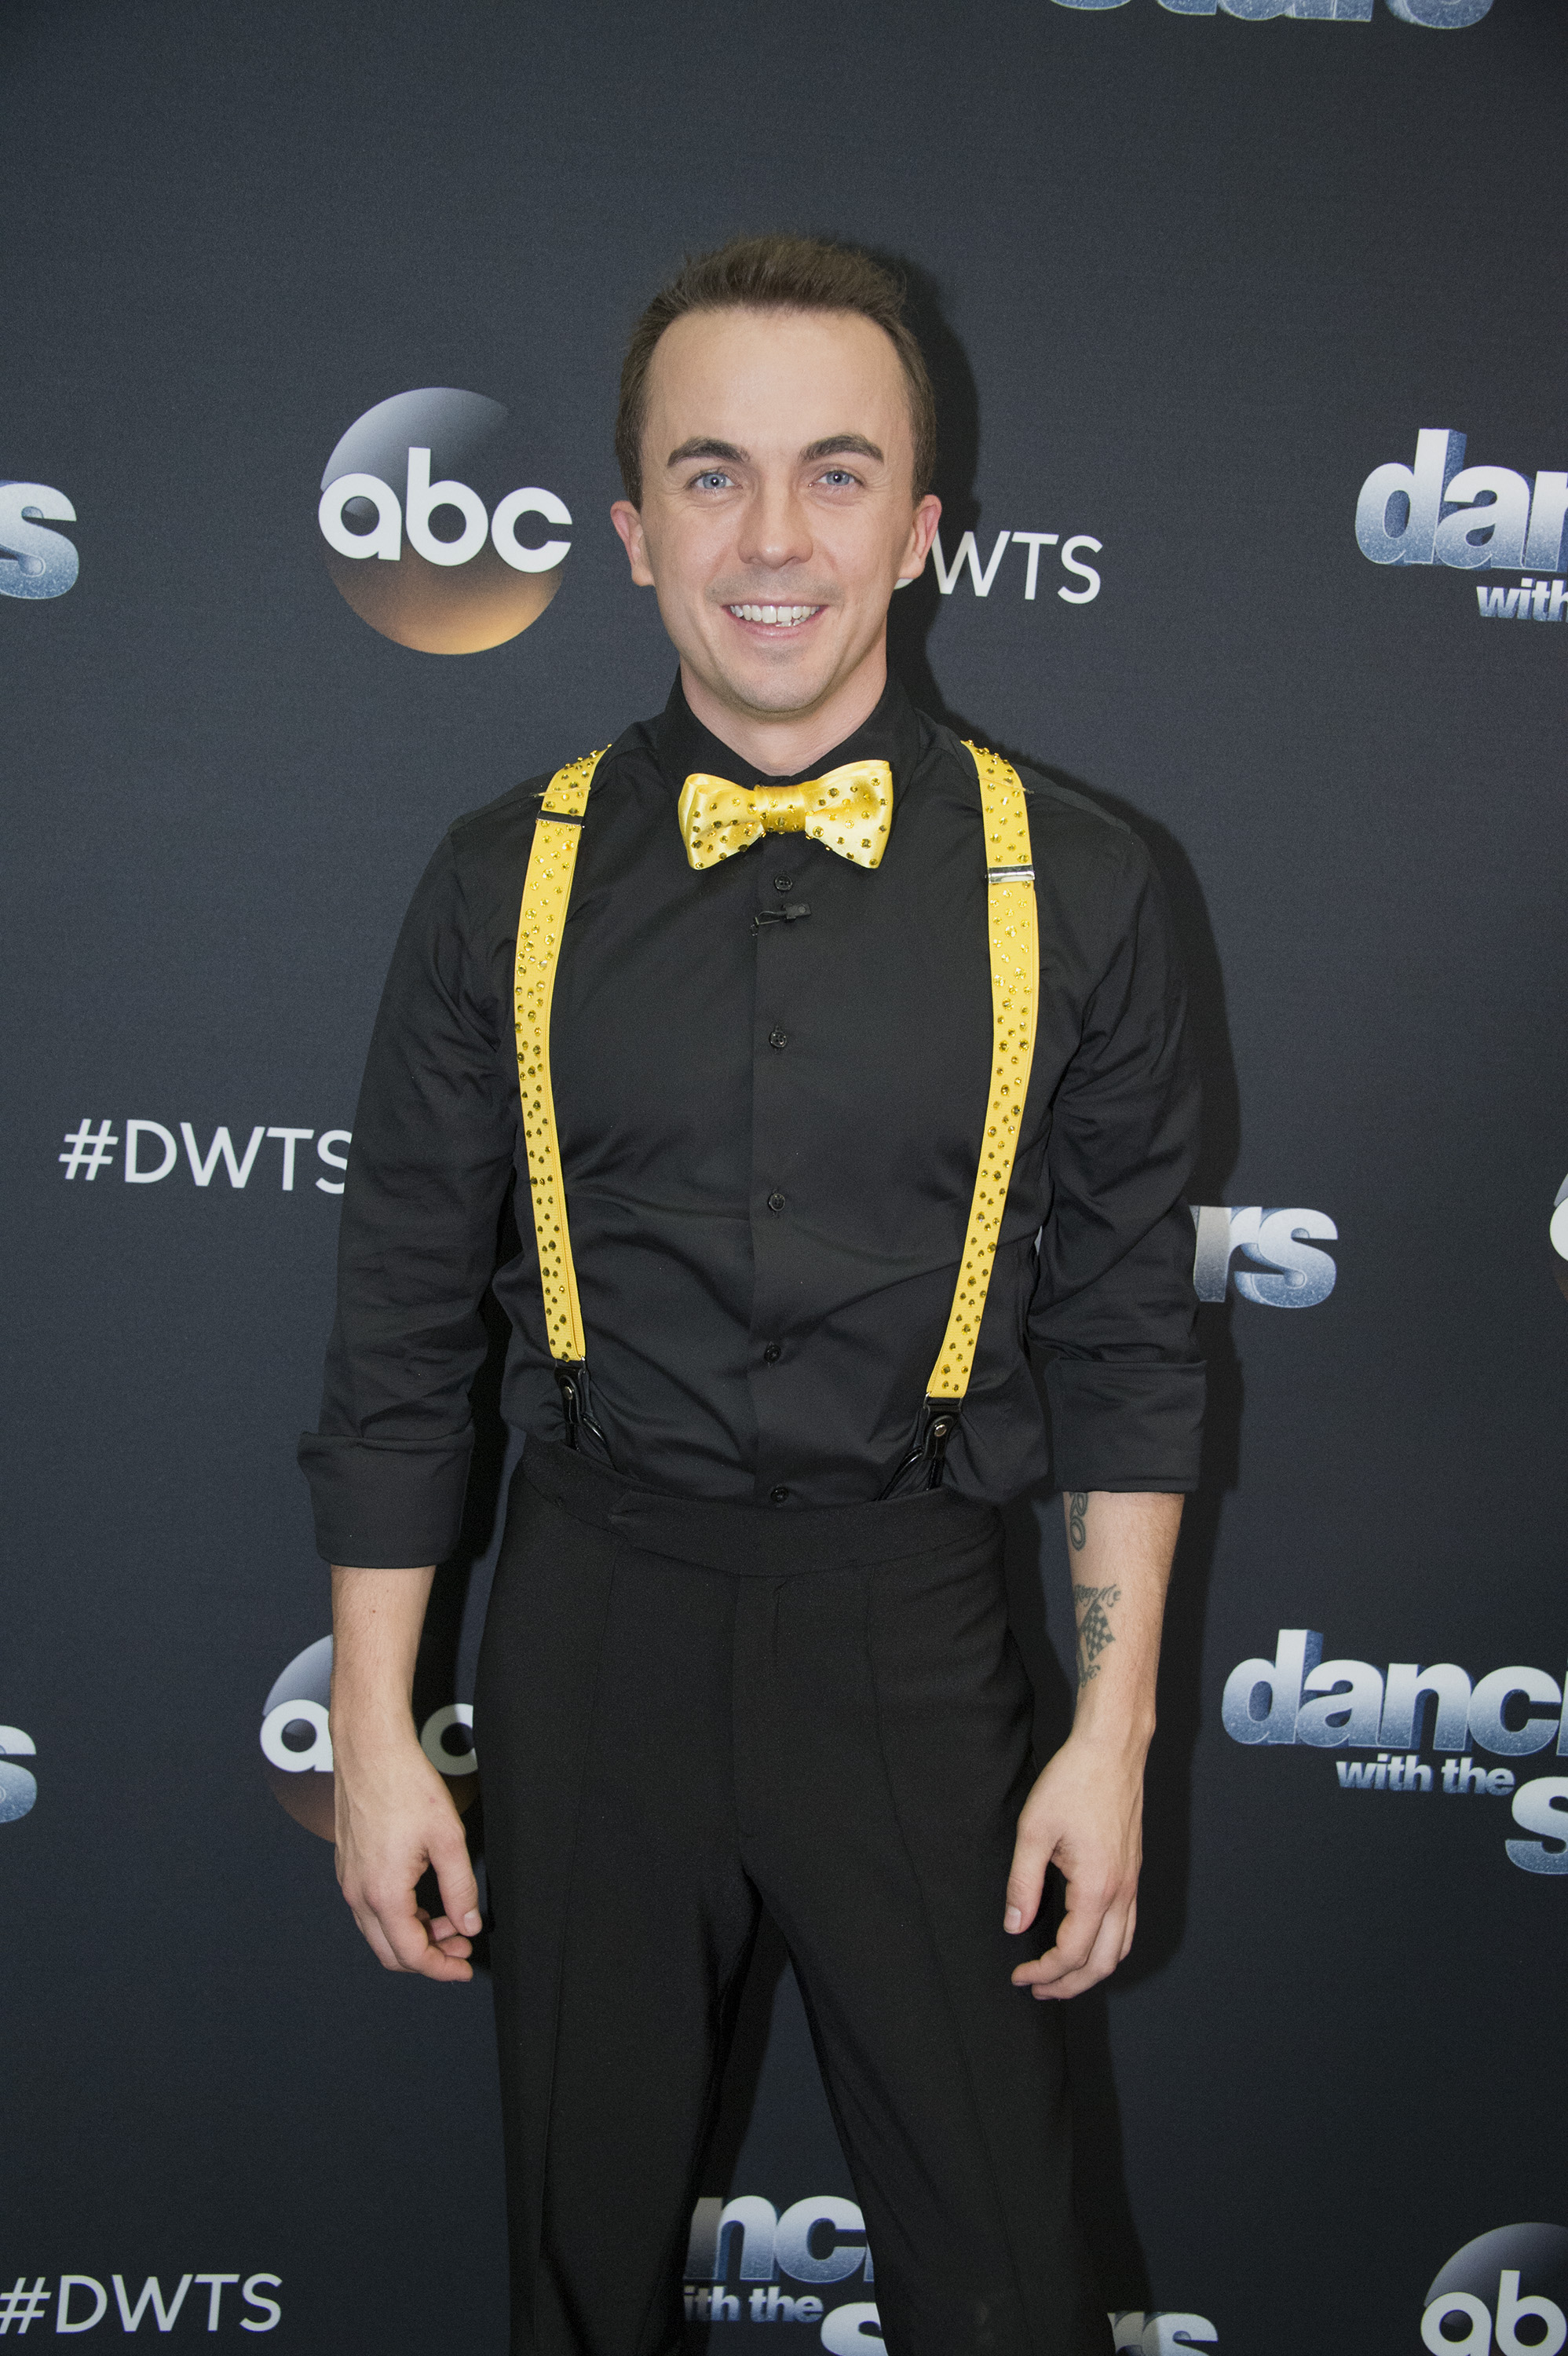 Frankie Muniz during season 25 of "Dancing With the Stars" week 8 on November 6, 2017 in Los Angeles, California | Source: Getty Images